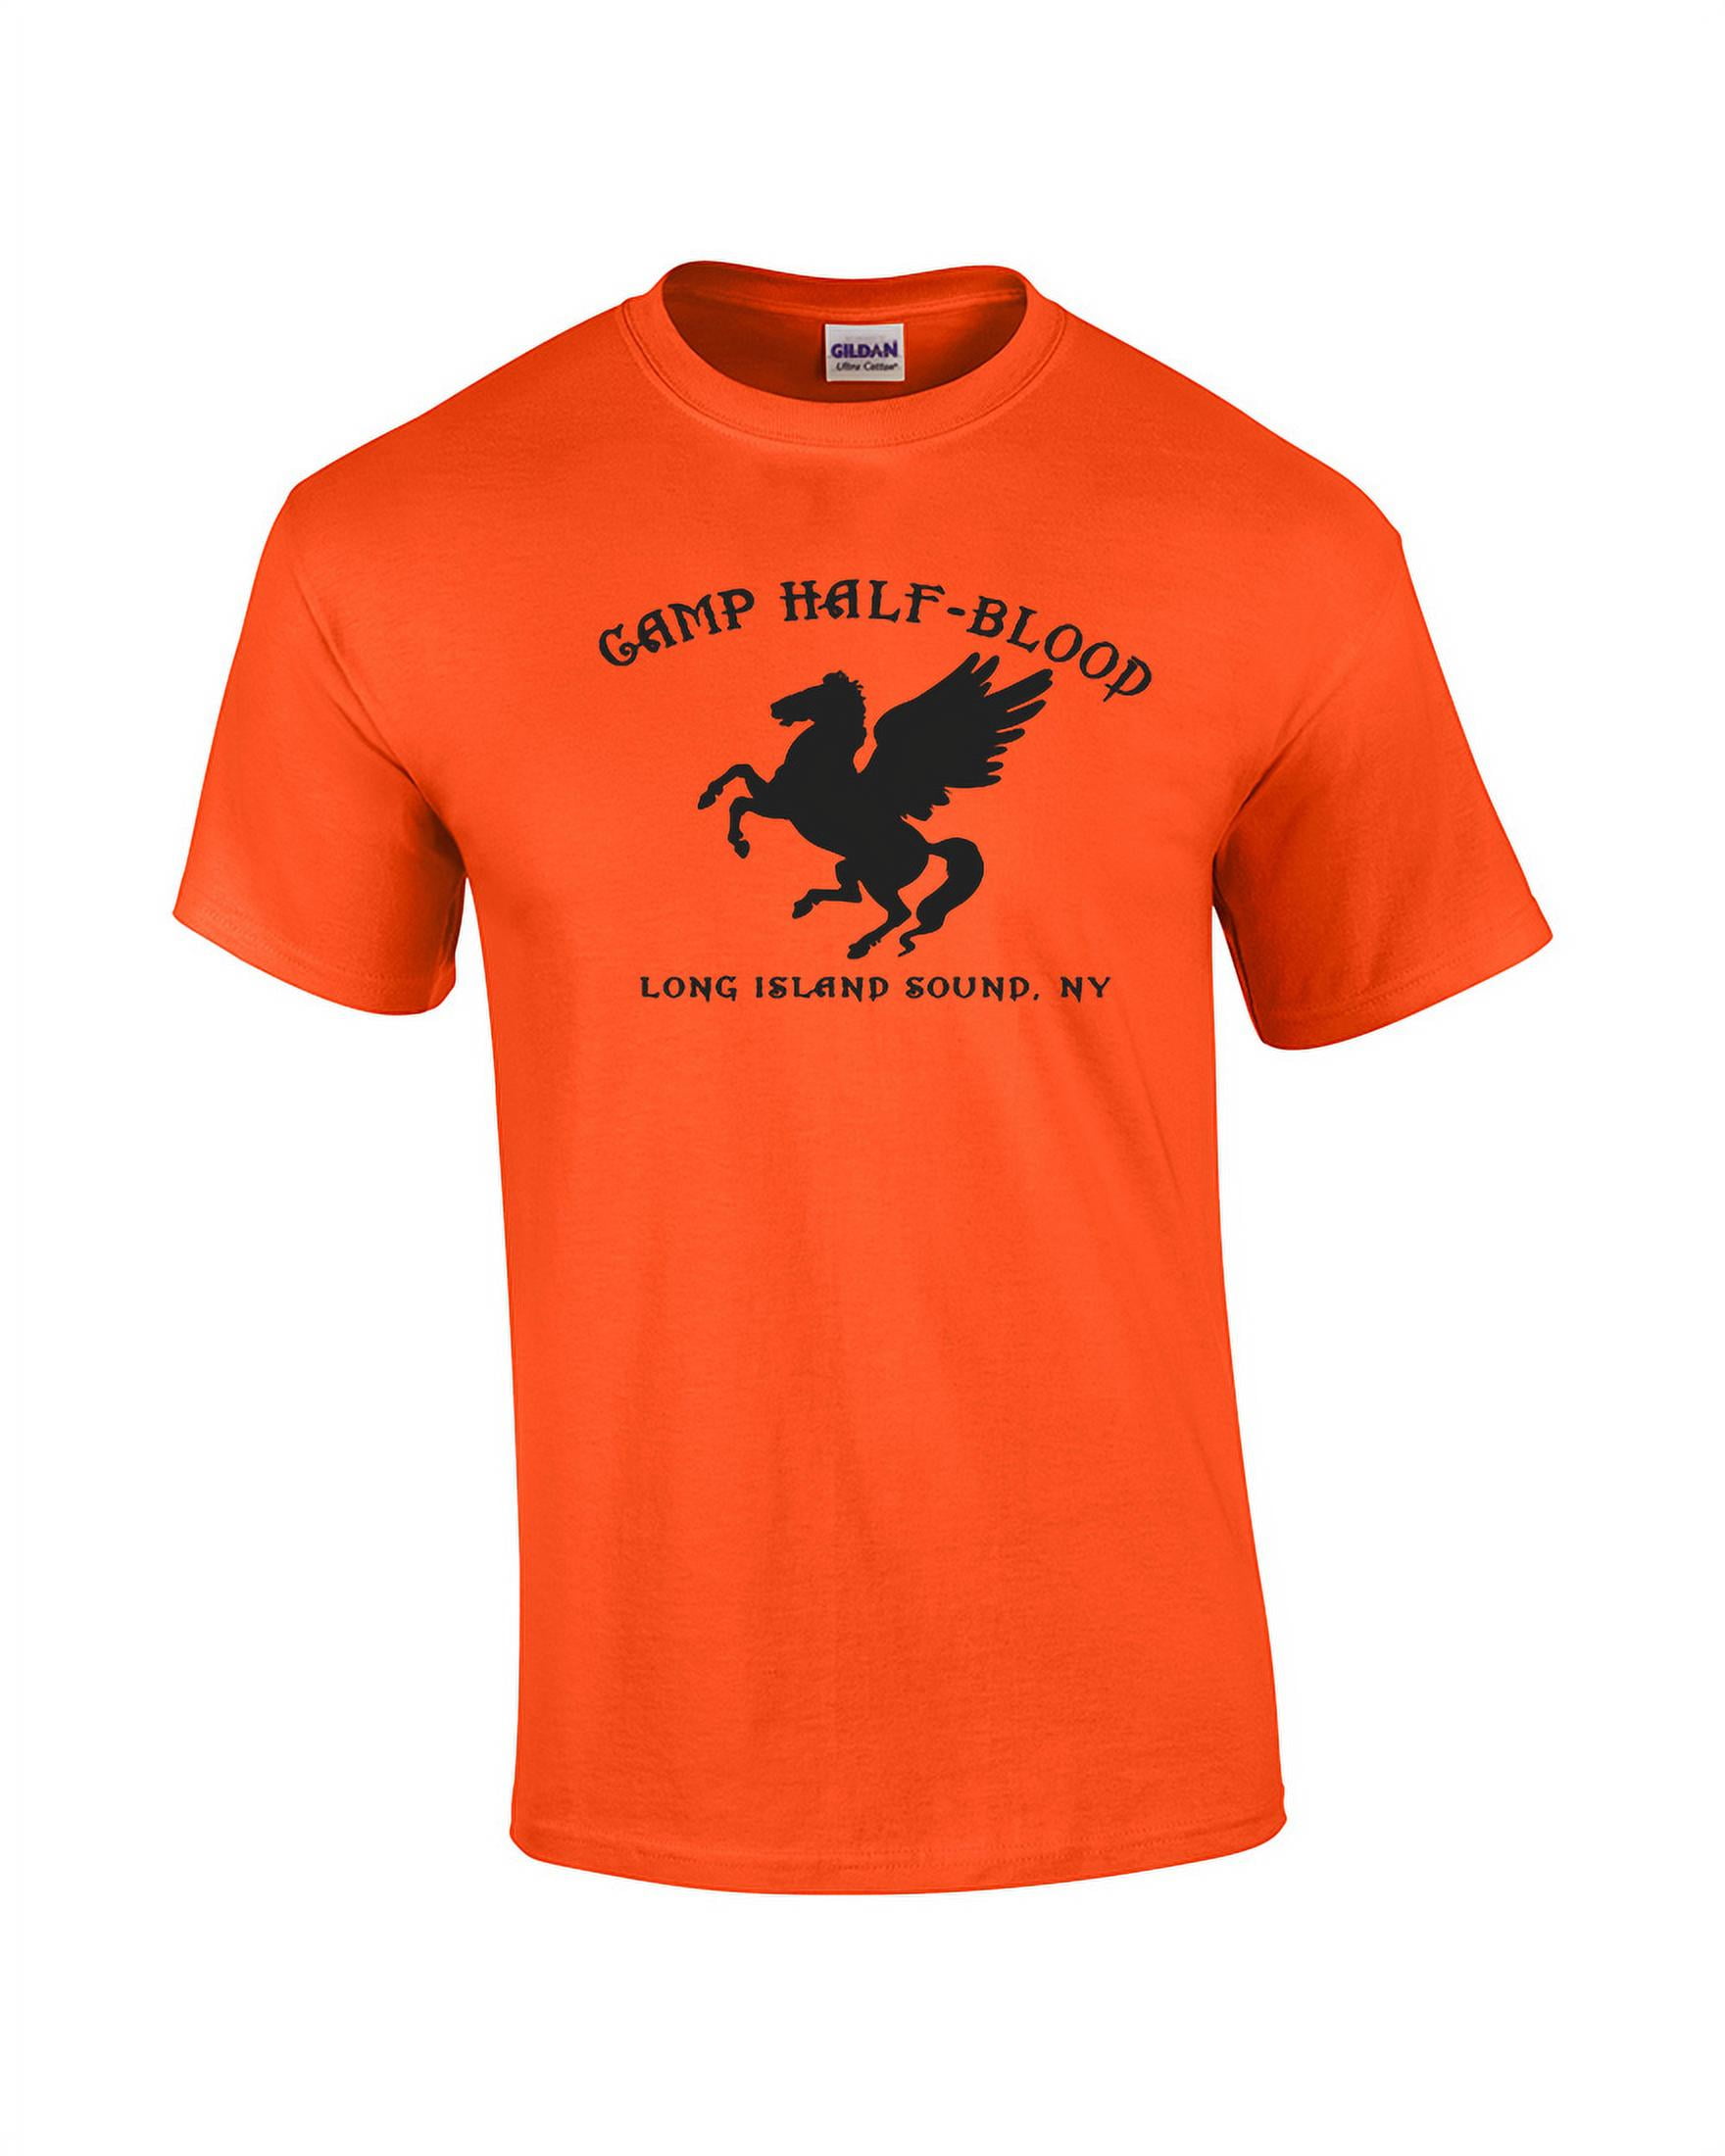  shop4ever Camp Half Blood Youth's T-Shirt Demigod Child's Tee :  Clothing, Shoes & Jewelry